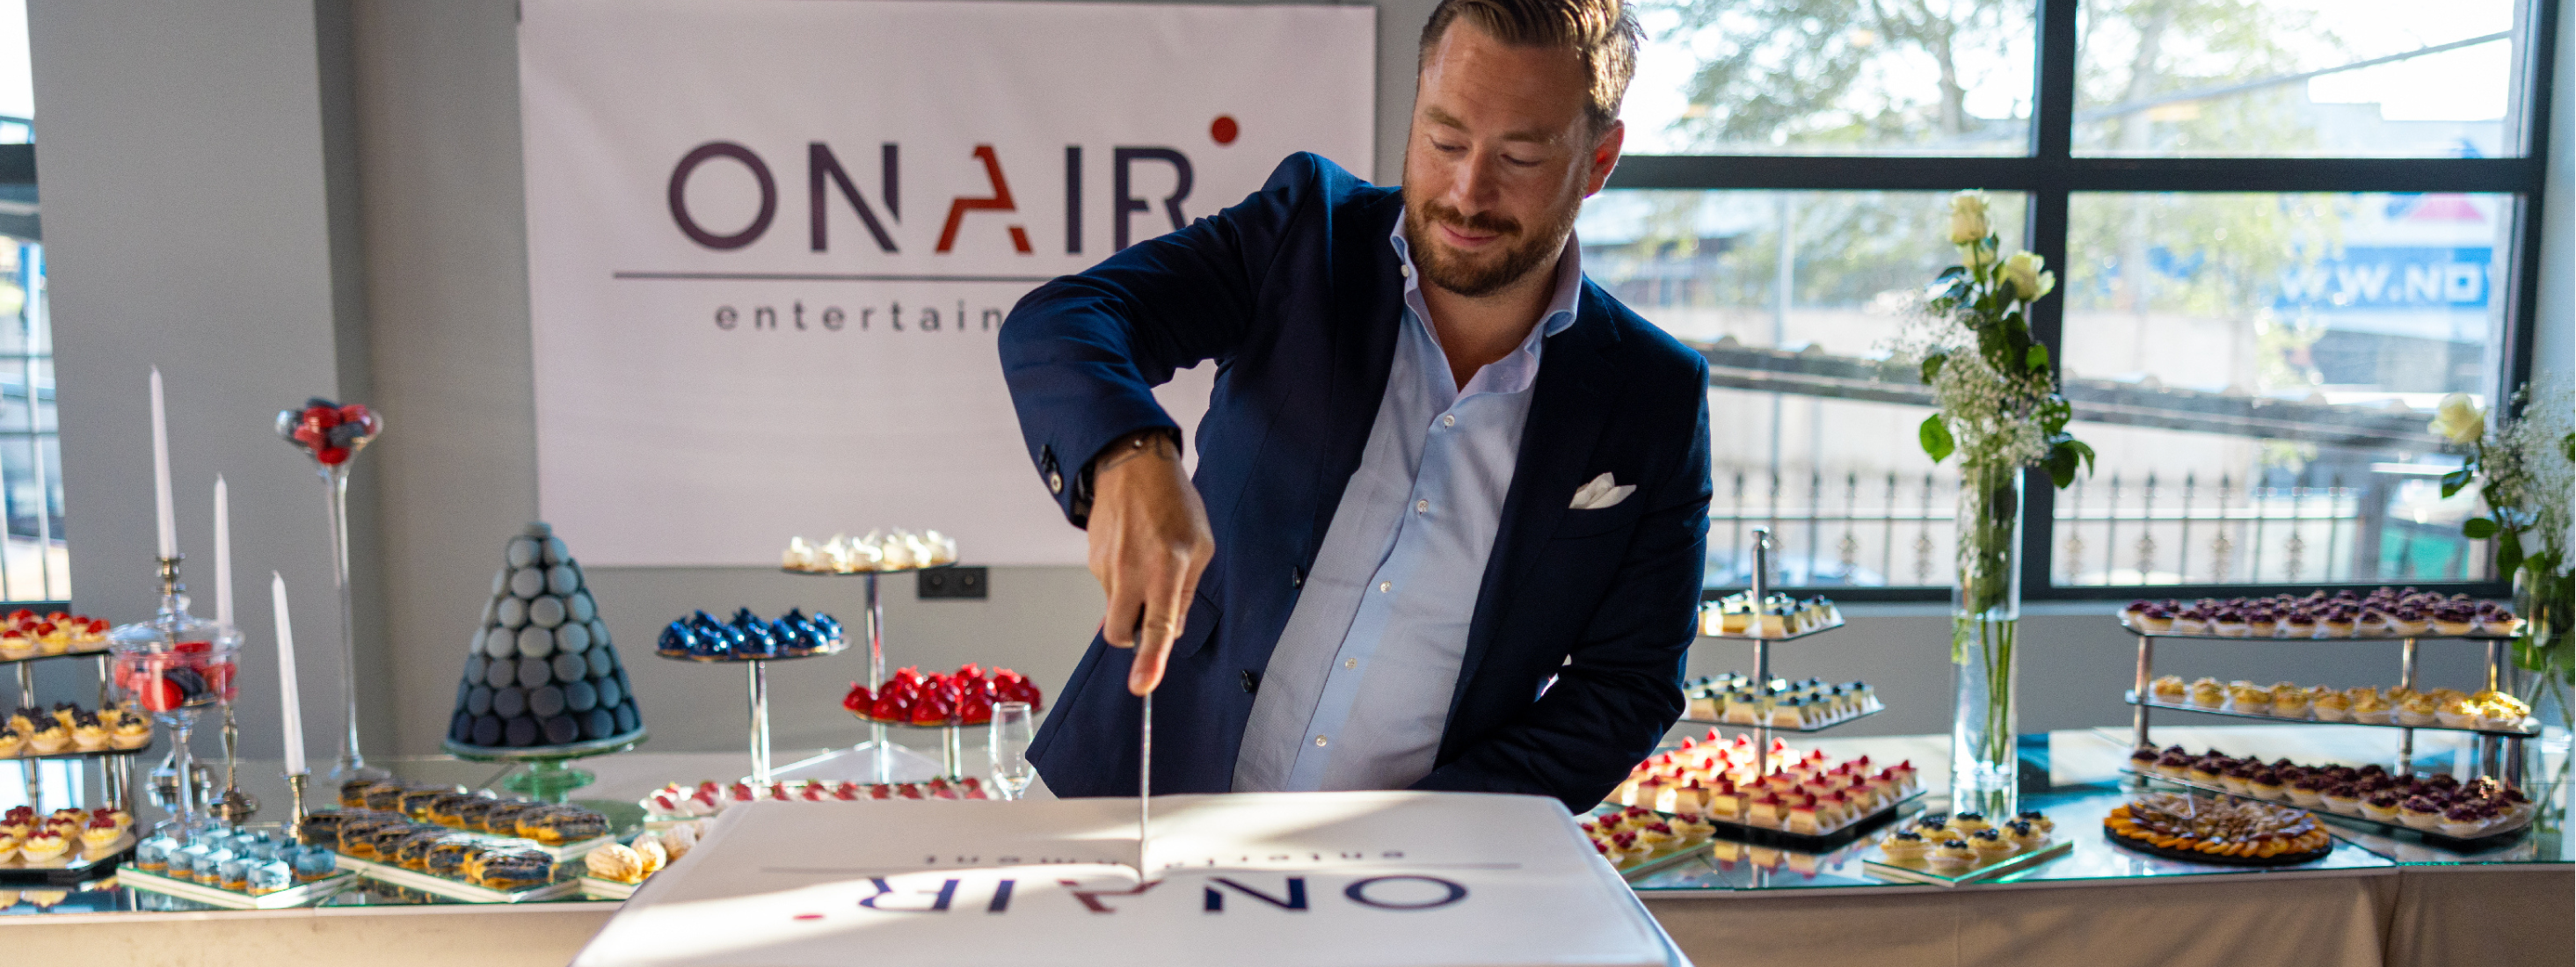 Photo of OnAir Entertainment's CEO, Andres Rengifo cutting a cake in celebration of the studio opening in Tibilsi, Georgia.